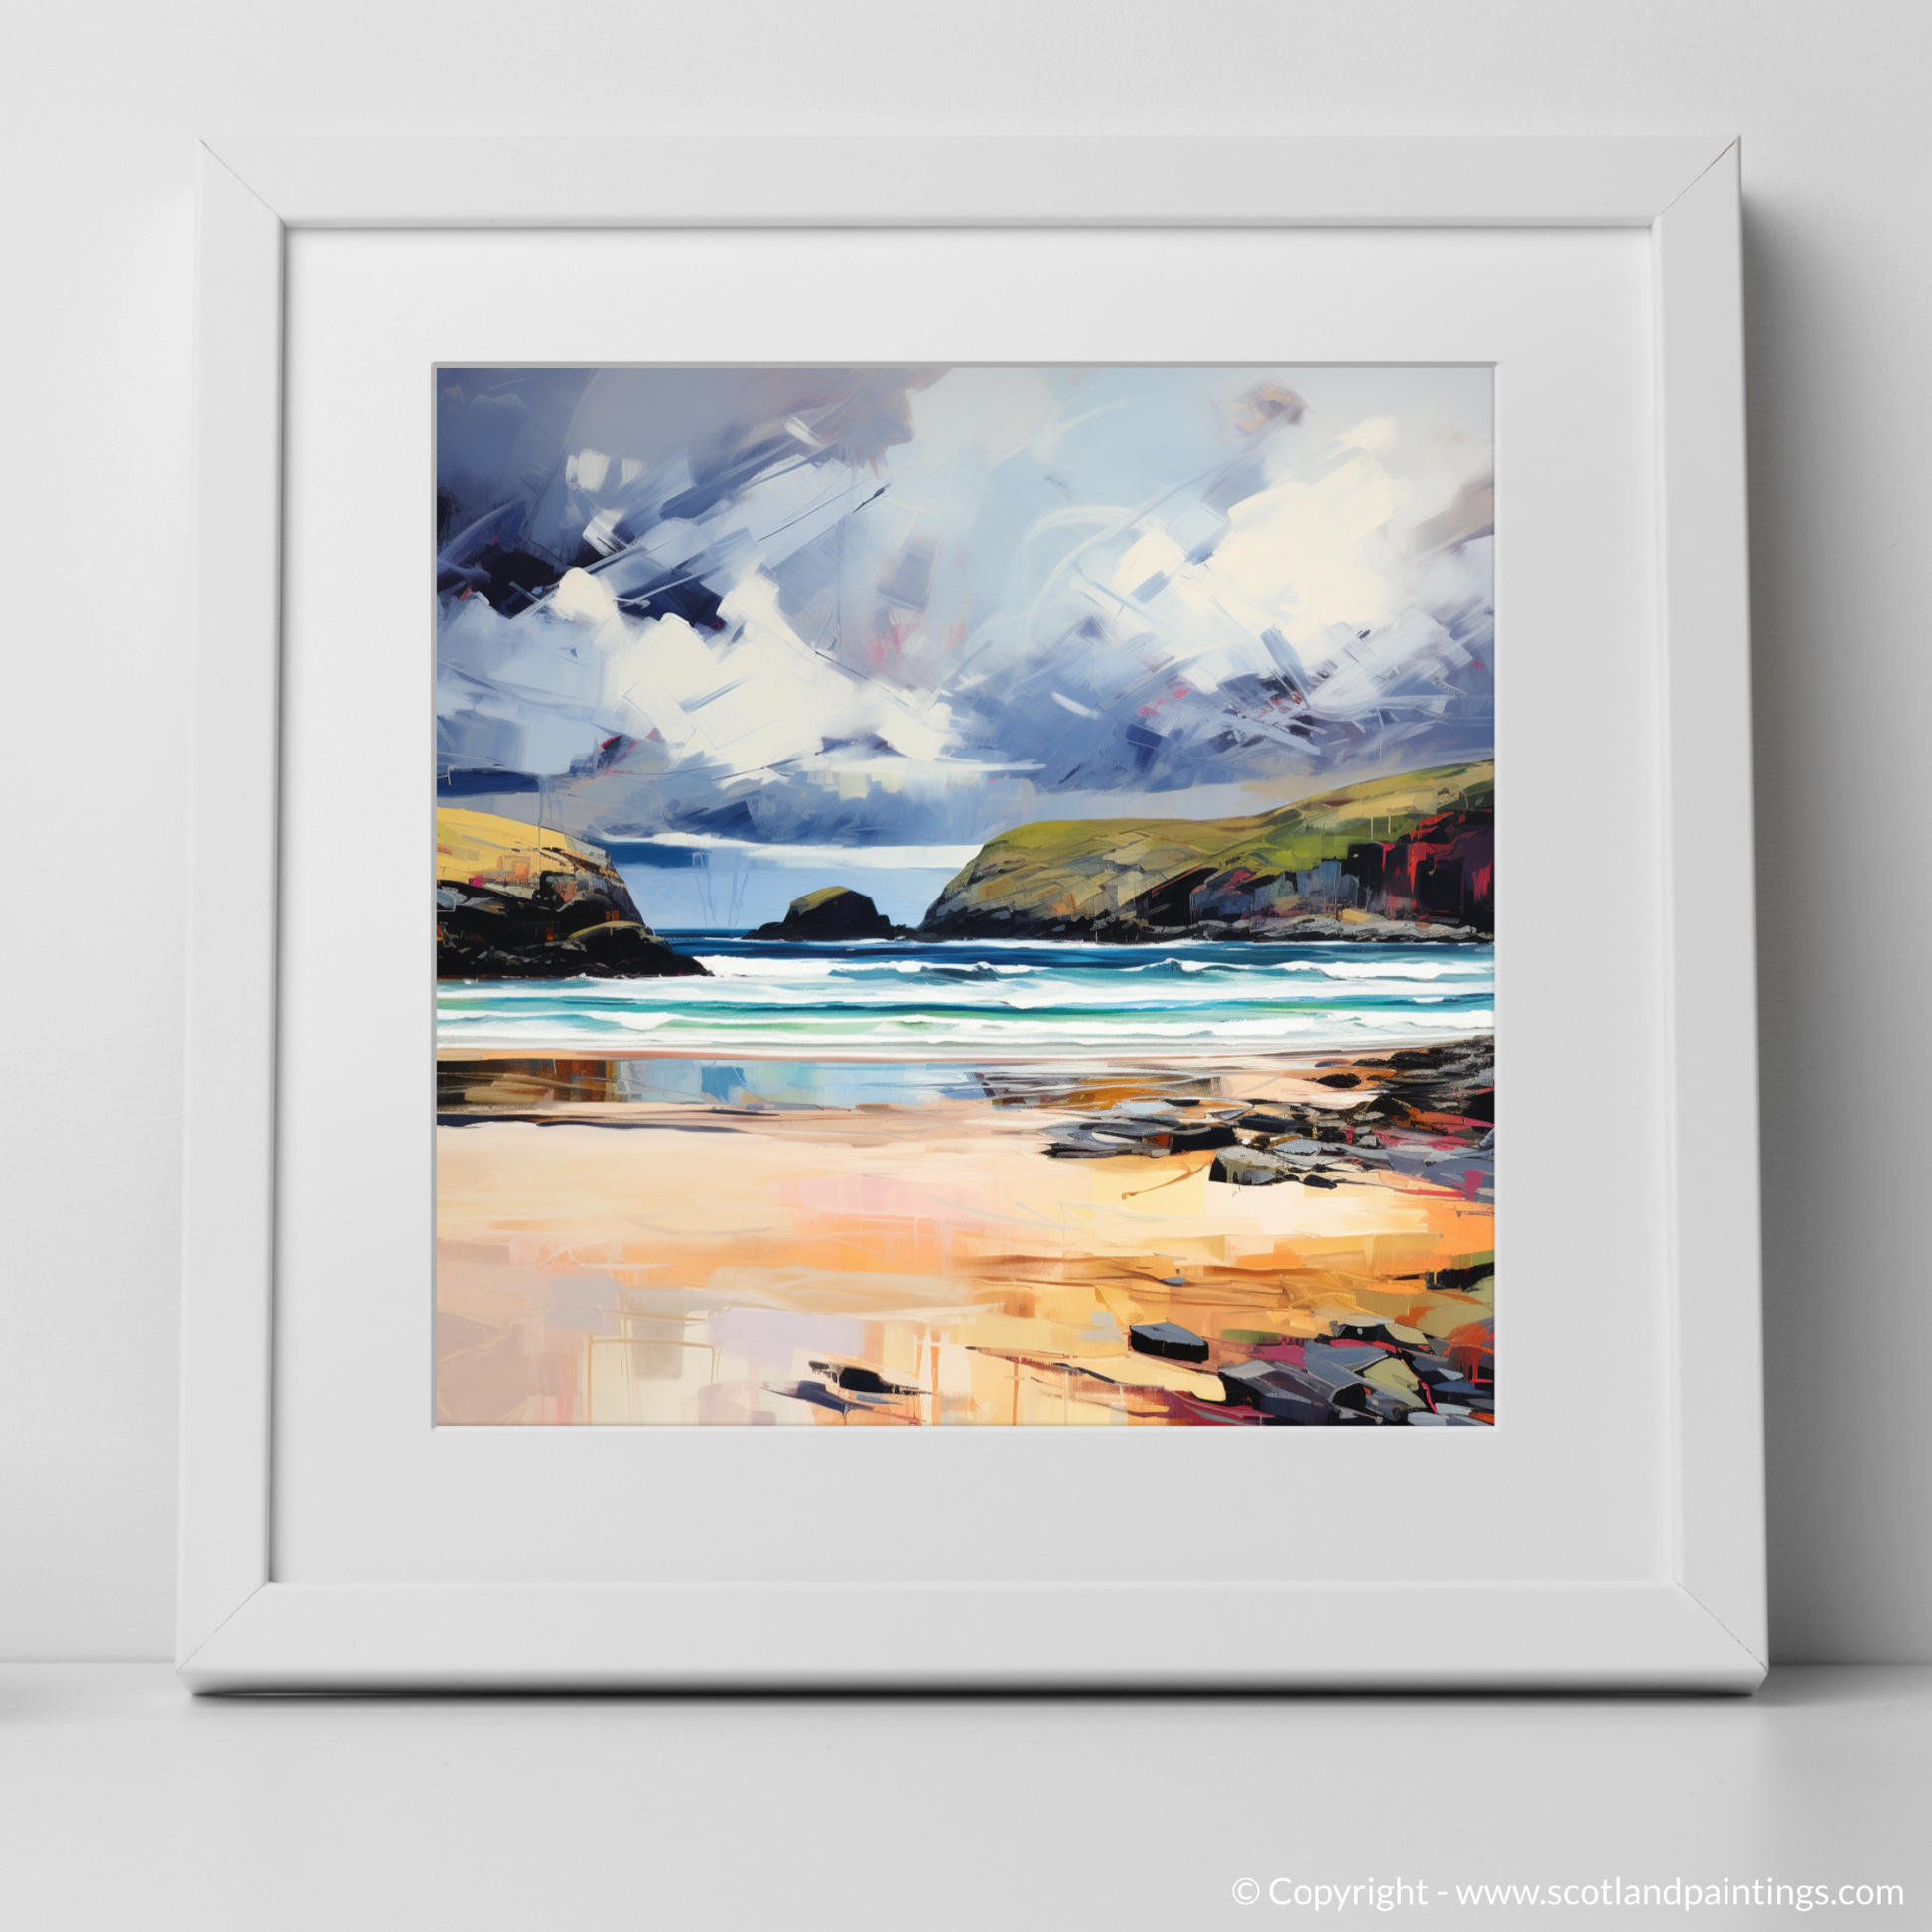 Art Print of Sandwood Bay with a stormy sky with a white frame